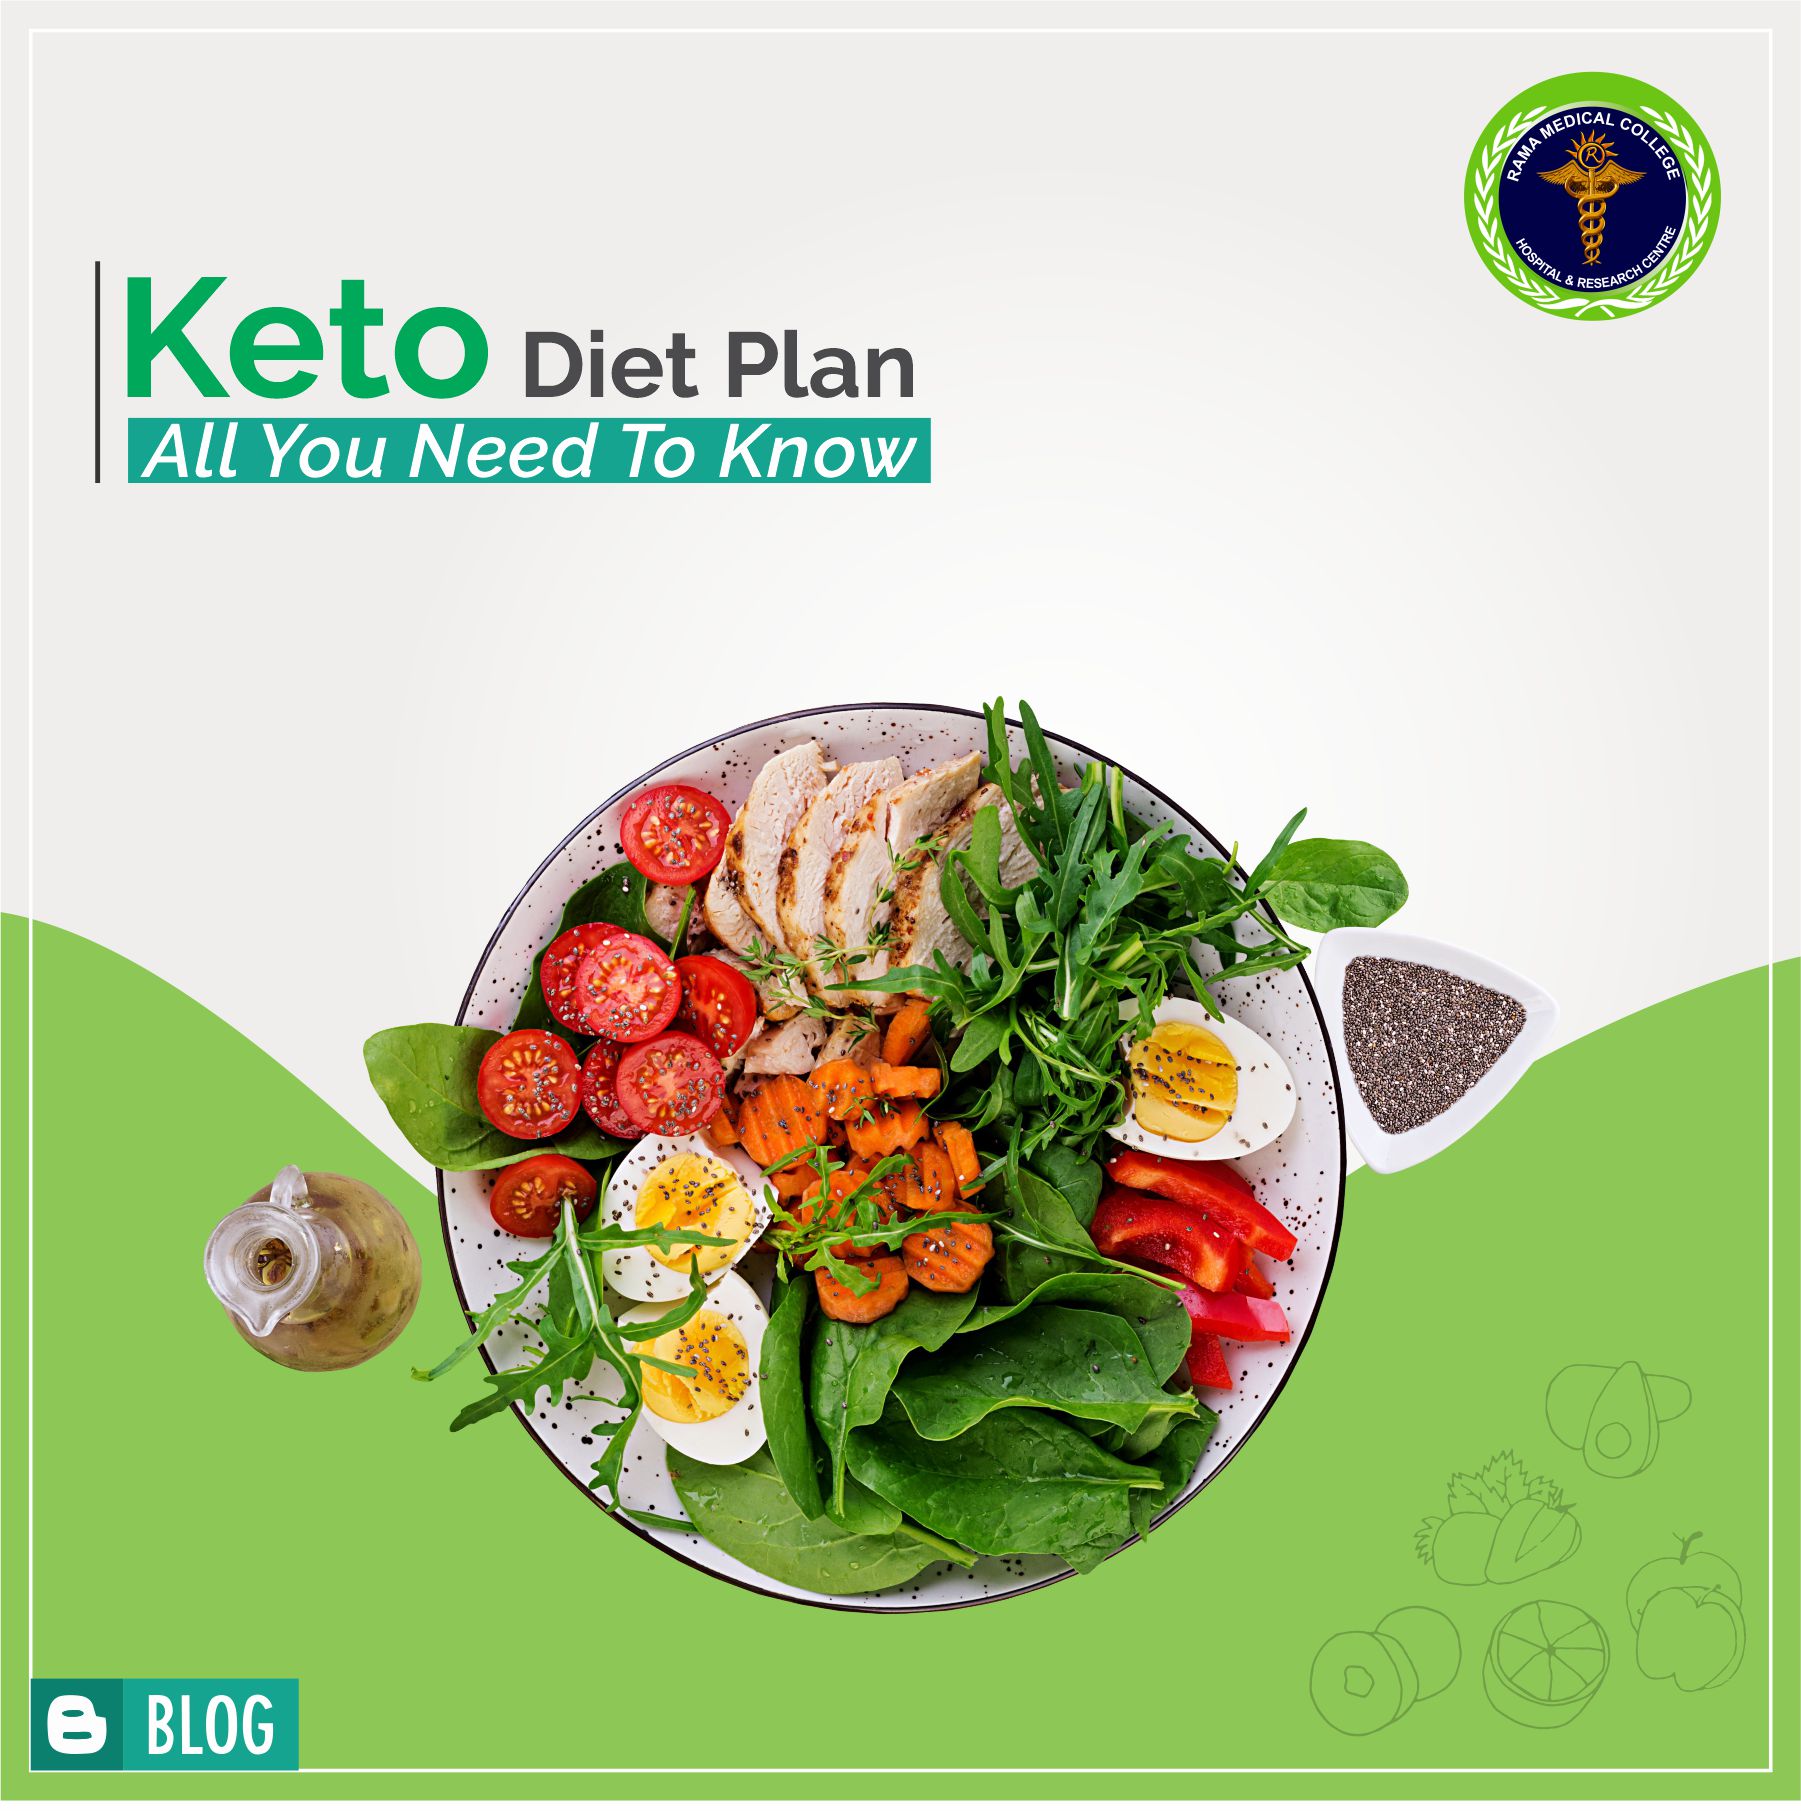 Keto Diet Plan- All you need to know